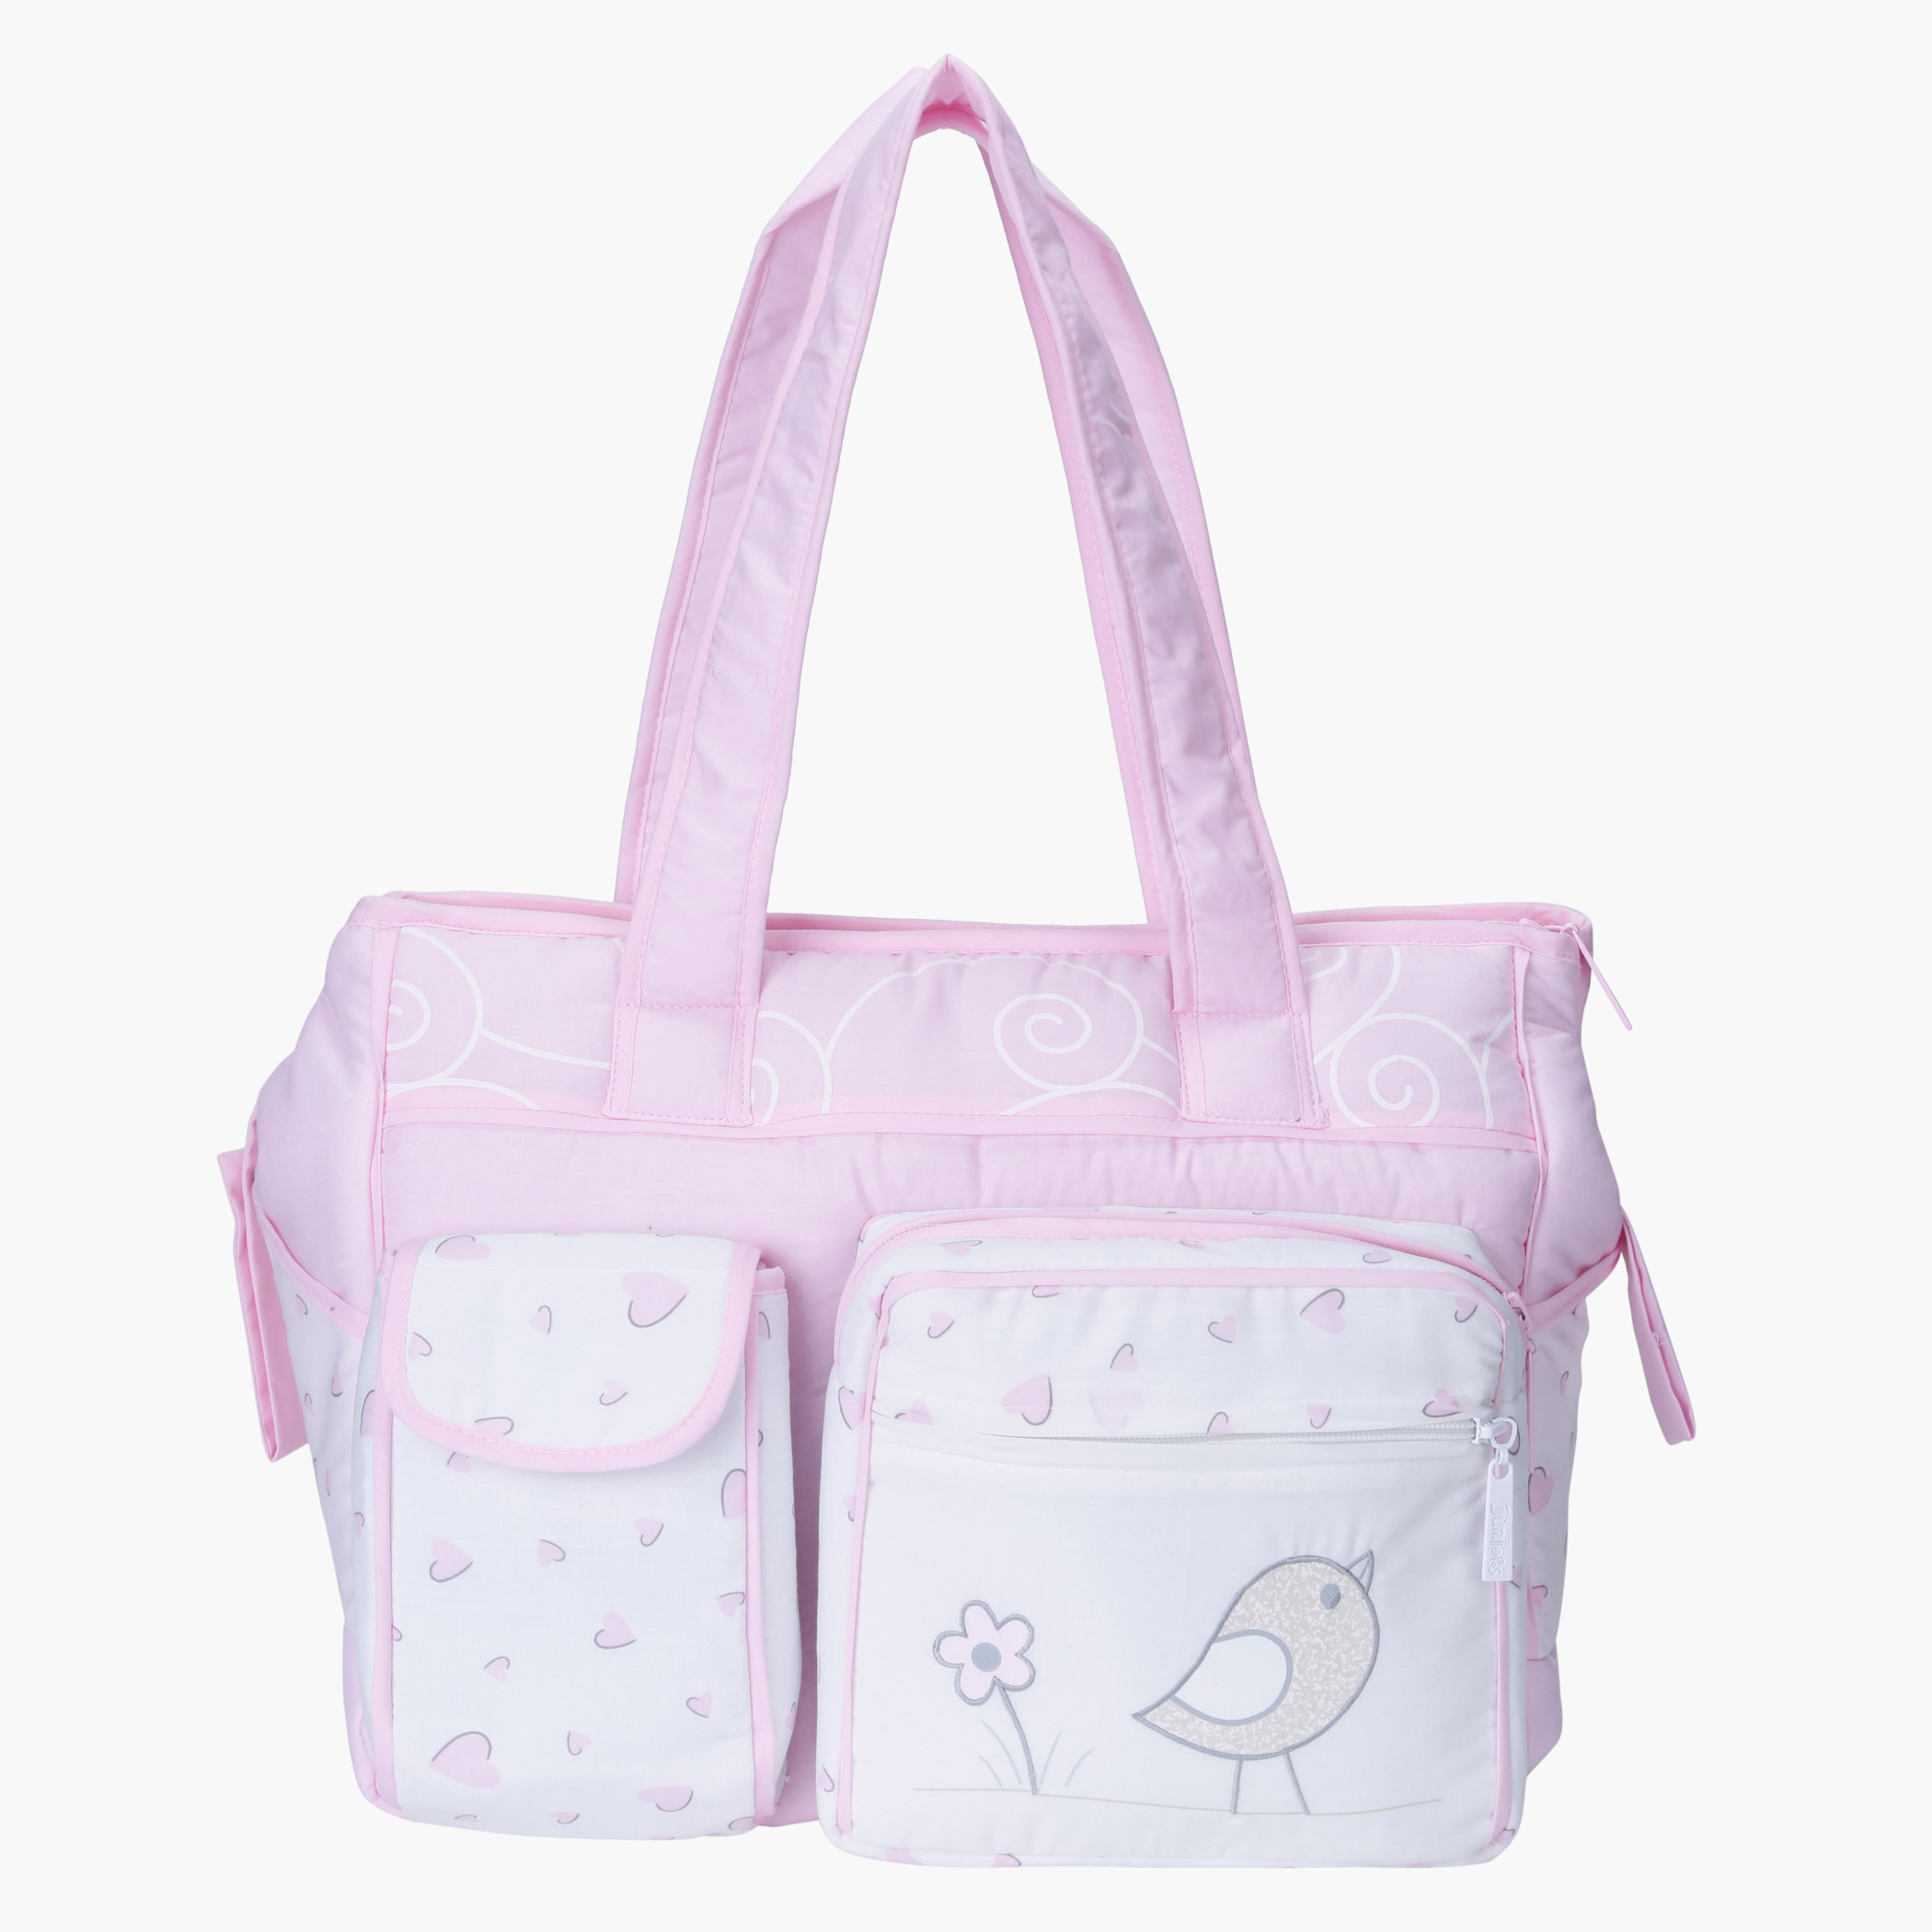 Set Of Multi Functional Designer Nappy Bags Online For Moms Print Leather  And Canvas, Perfect For Dry And Stylish Moms Essentials From Dtysunny2018,  $16.06 | DHgate.Com